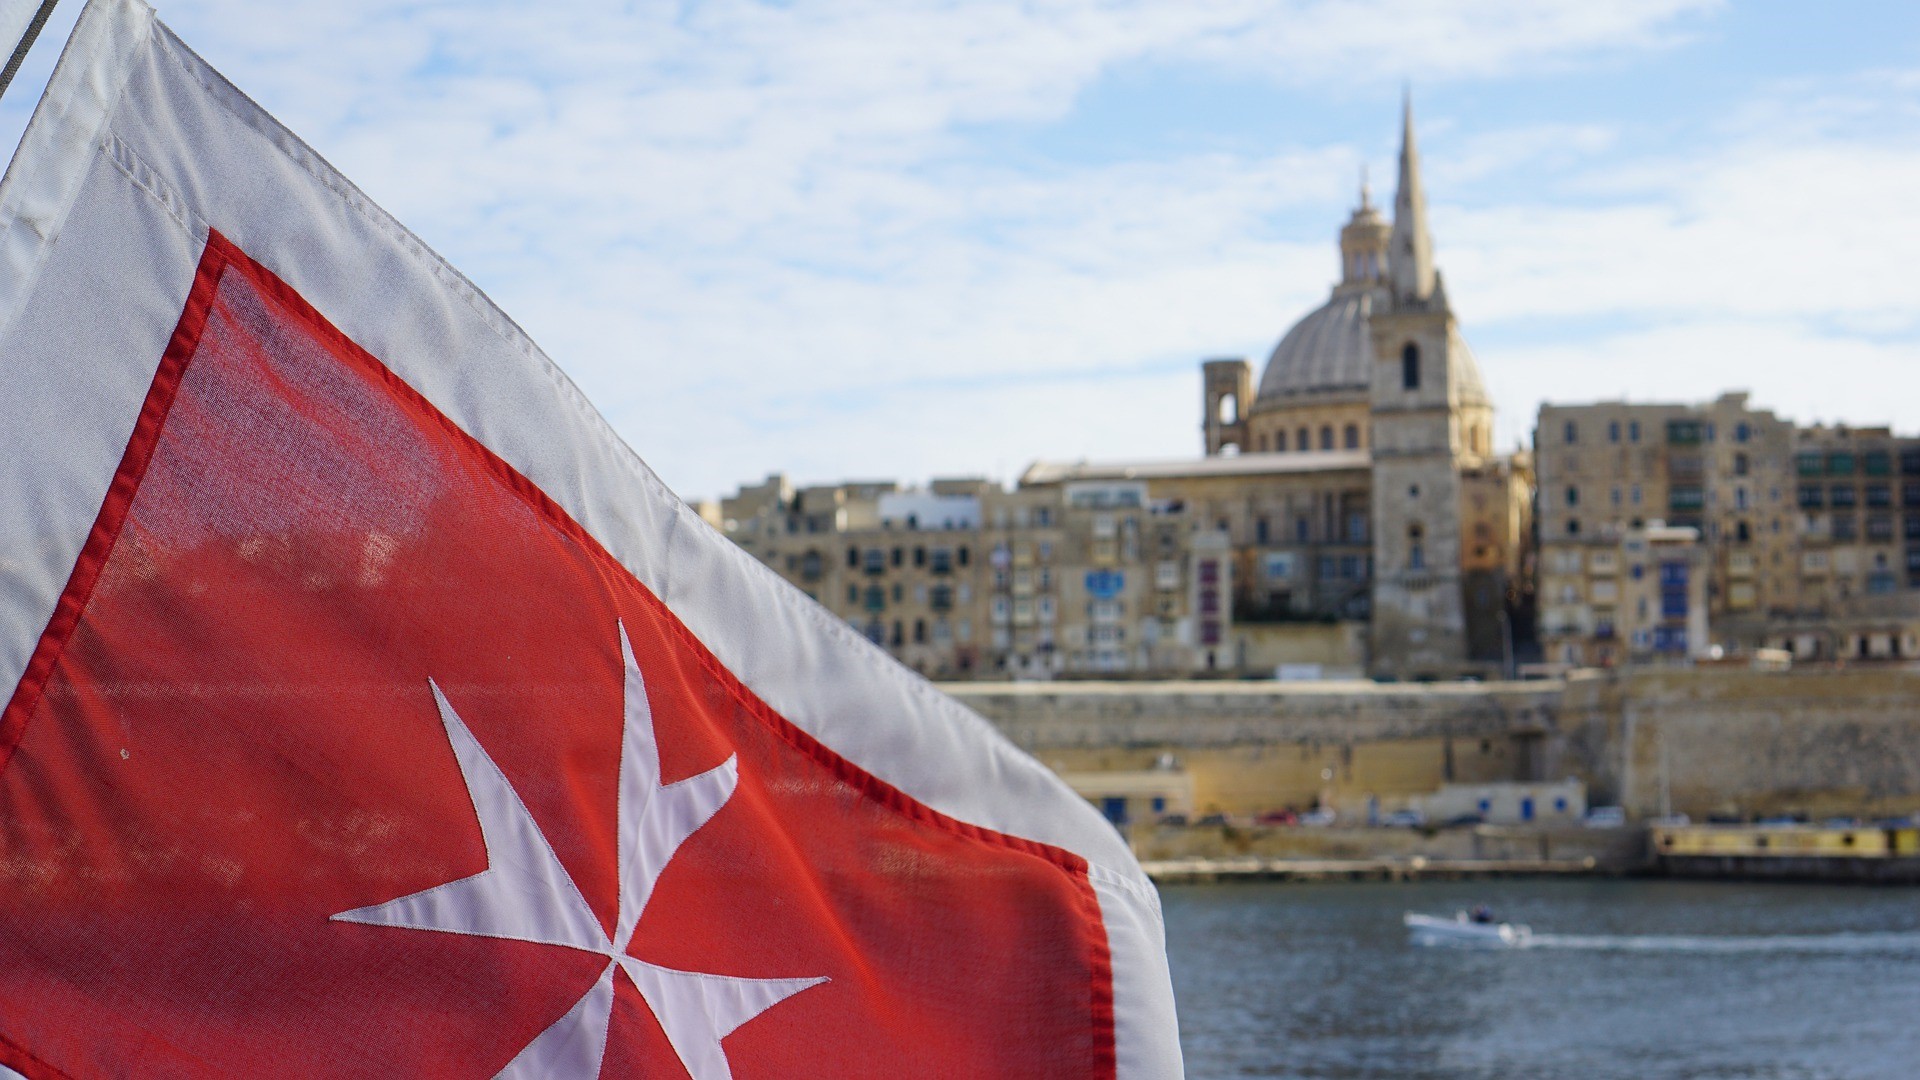 Maltese cross flag, with Valletta in the background.